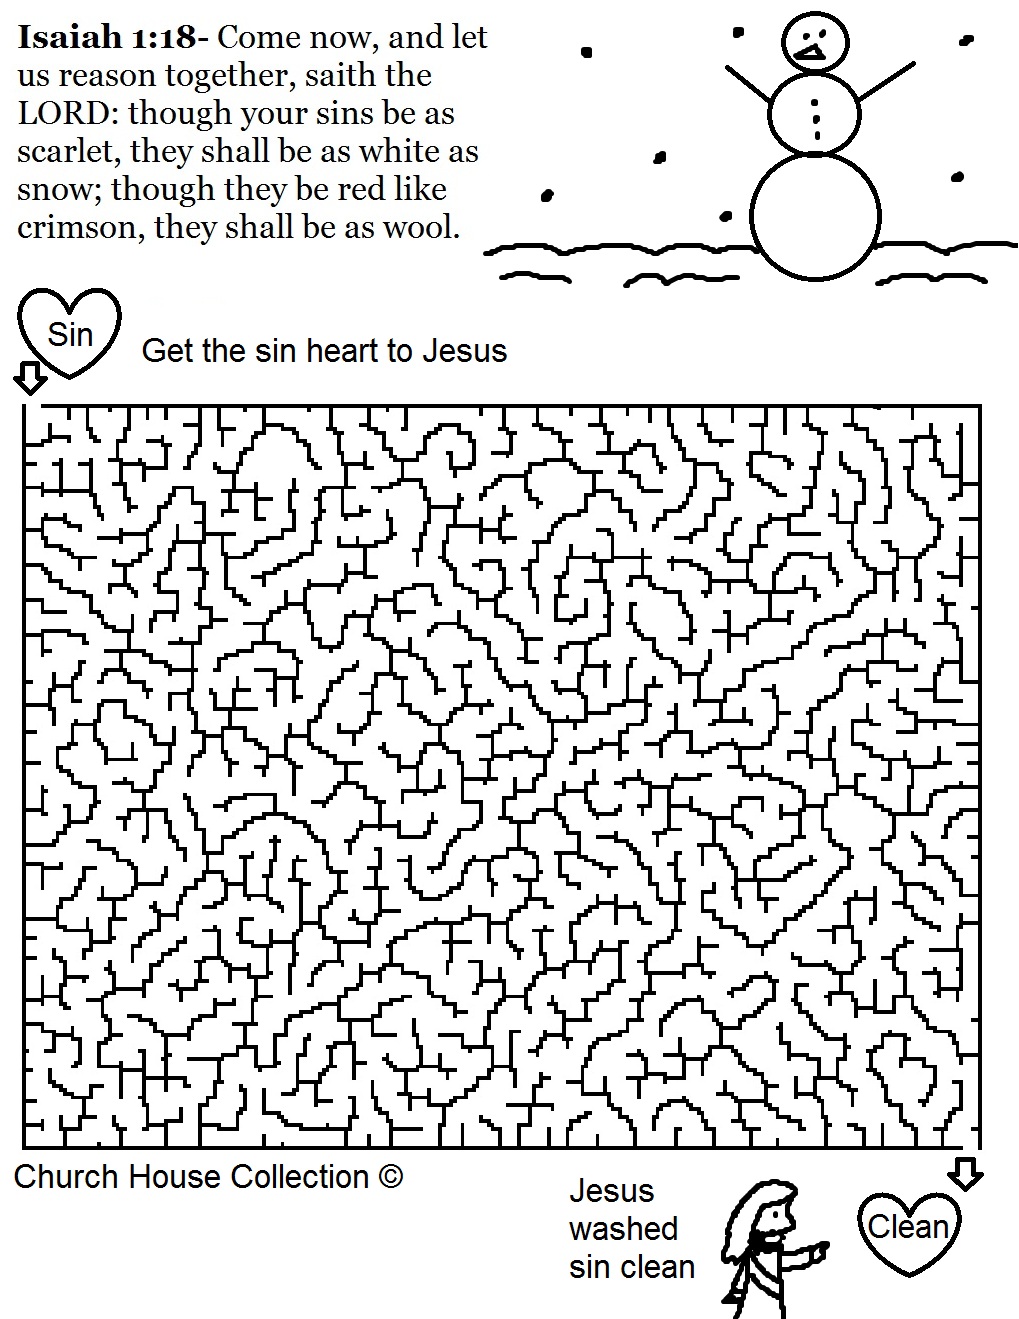 Free Christmas Snowman Isaiah 1:18 Printable Maze Template for kids in Sunday school. Use with our Free Christmas Sunday school lessons for kids. By Church House Collection.